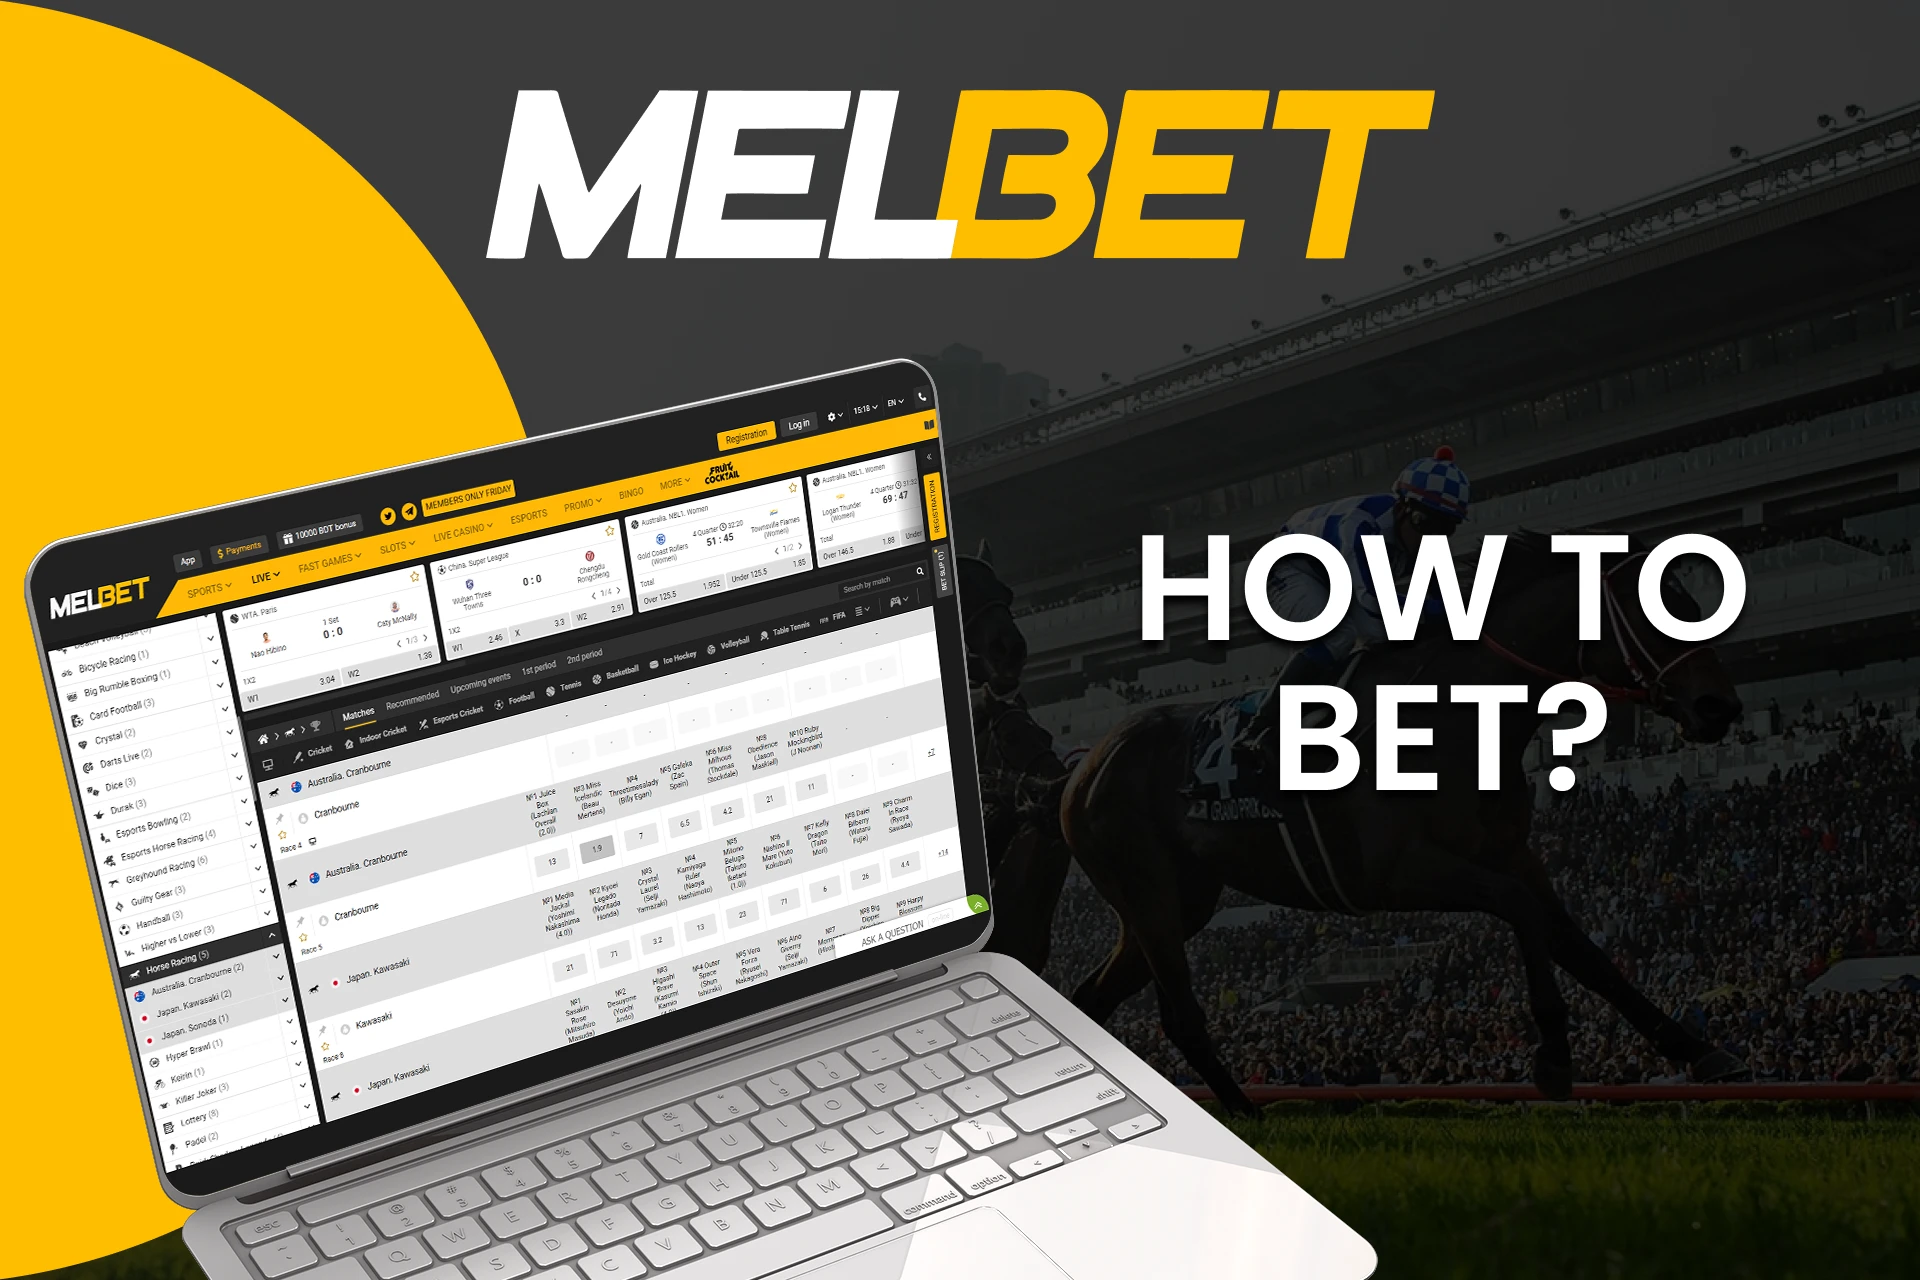 Go to the right section for betting on horse races from Melbet.